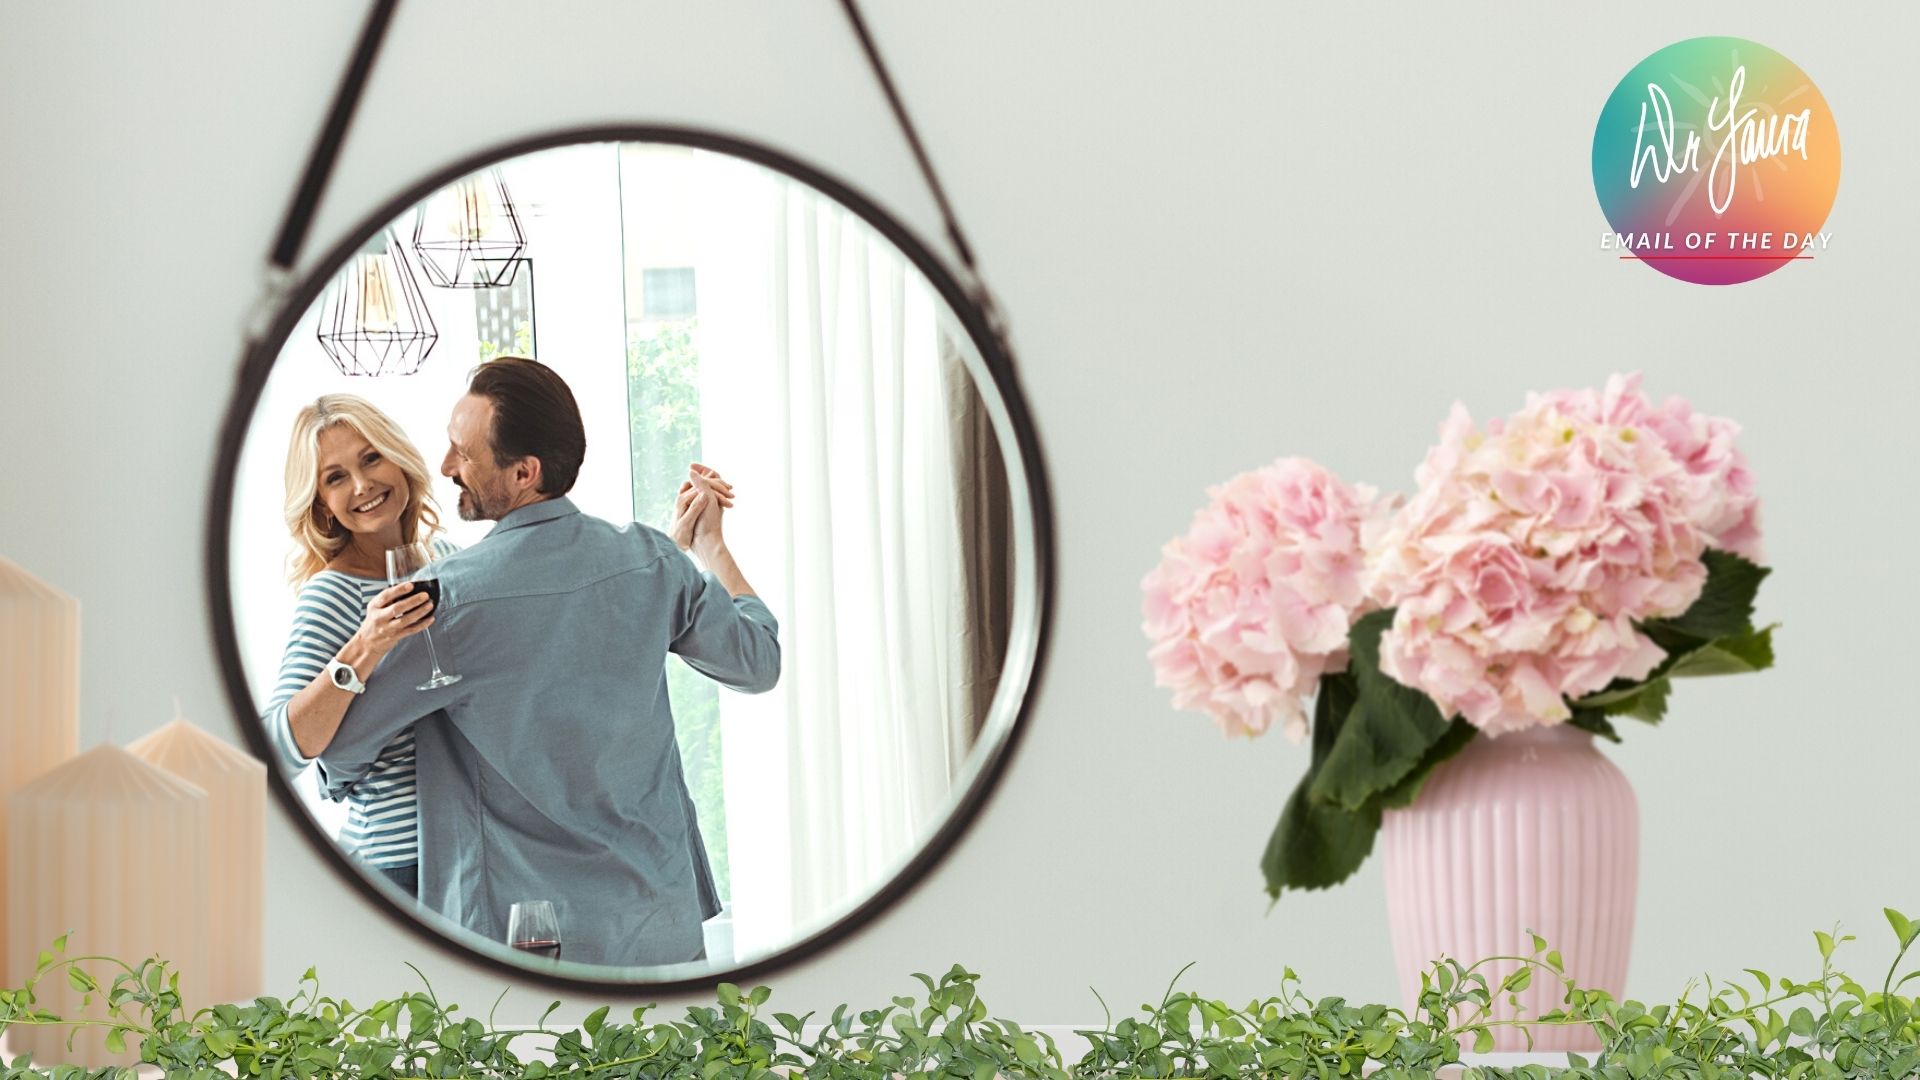 Mirror on wall reflects man dancing with woman who is smiling